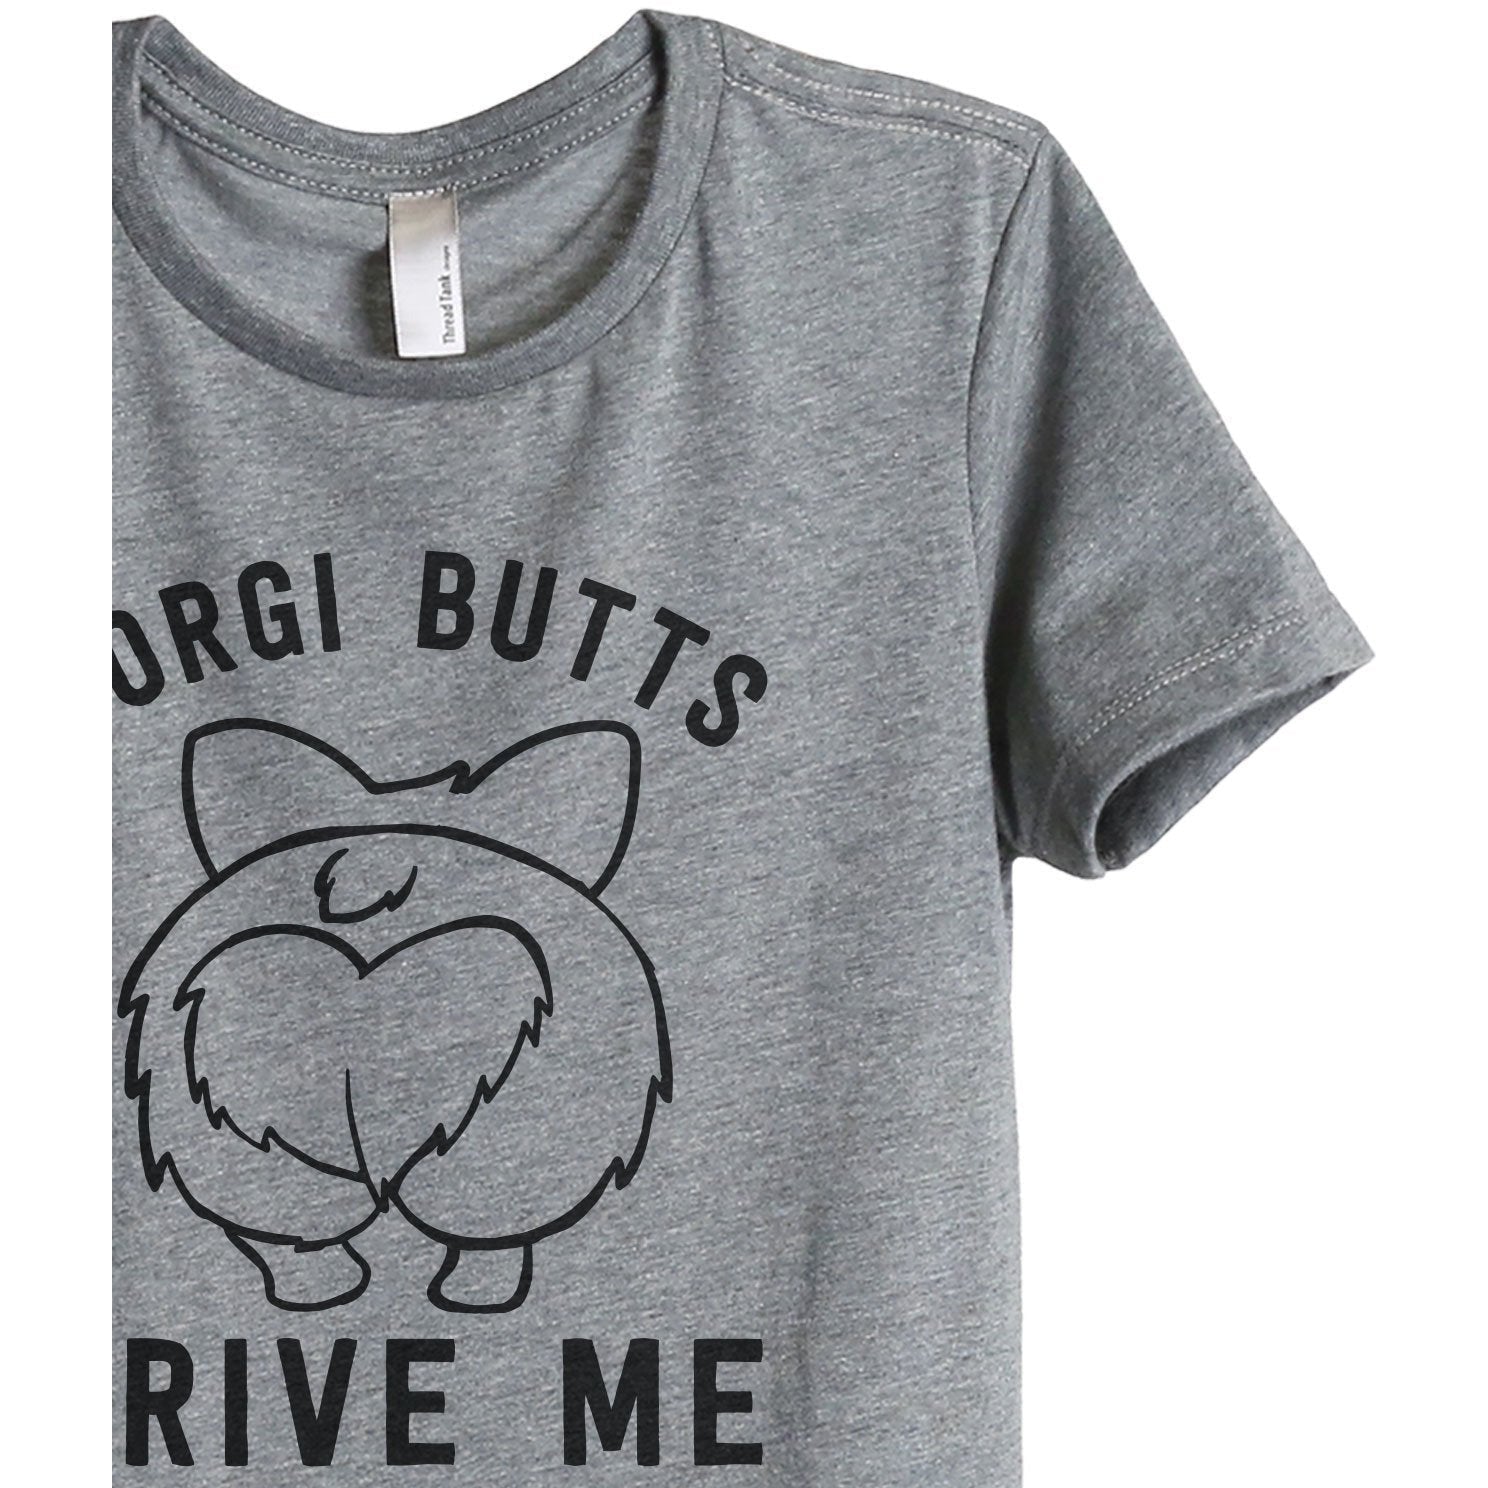 Corgi Butts Drive Me Nutts Women's Relaxed Crewneck T-Shirt Top Tee Heather Grey Zoom Details
